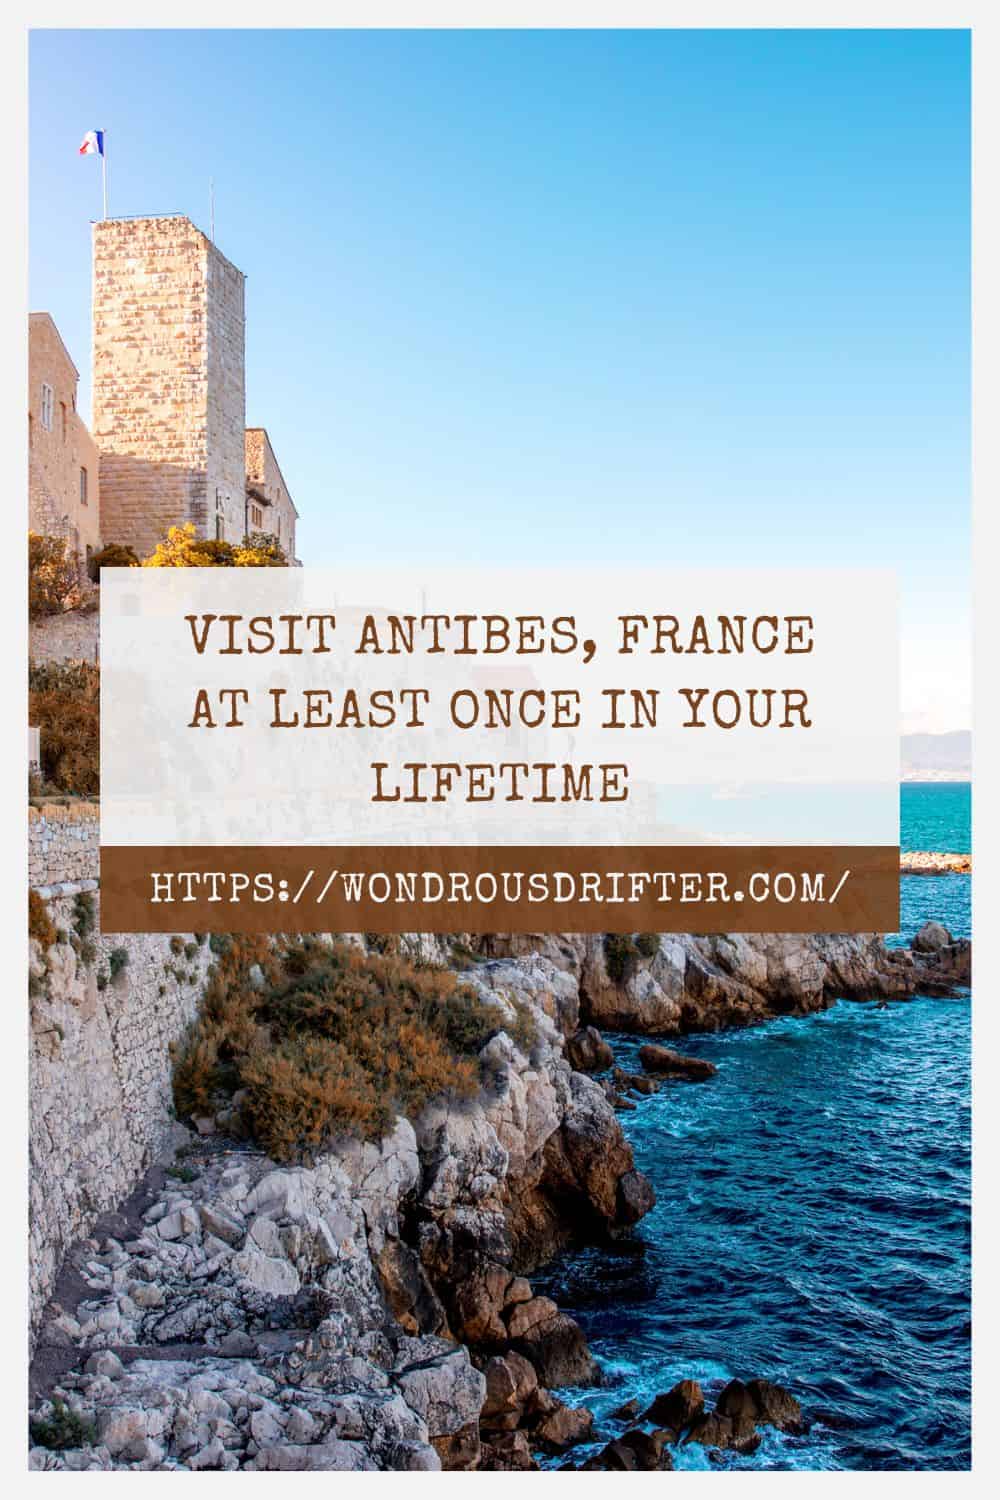 Visit Antibes France at least once in your lifetime